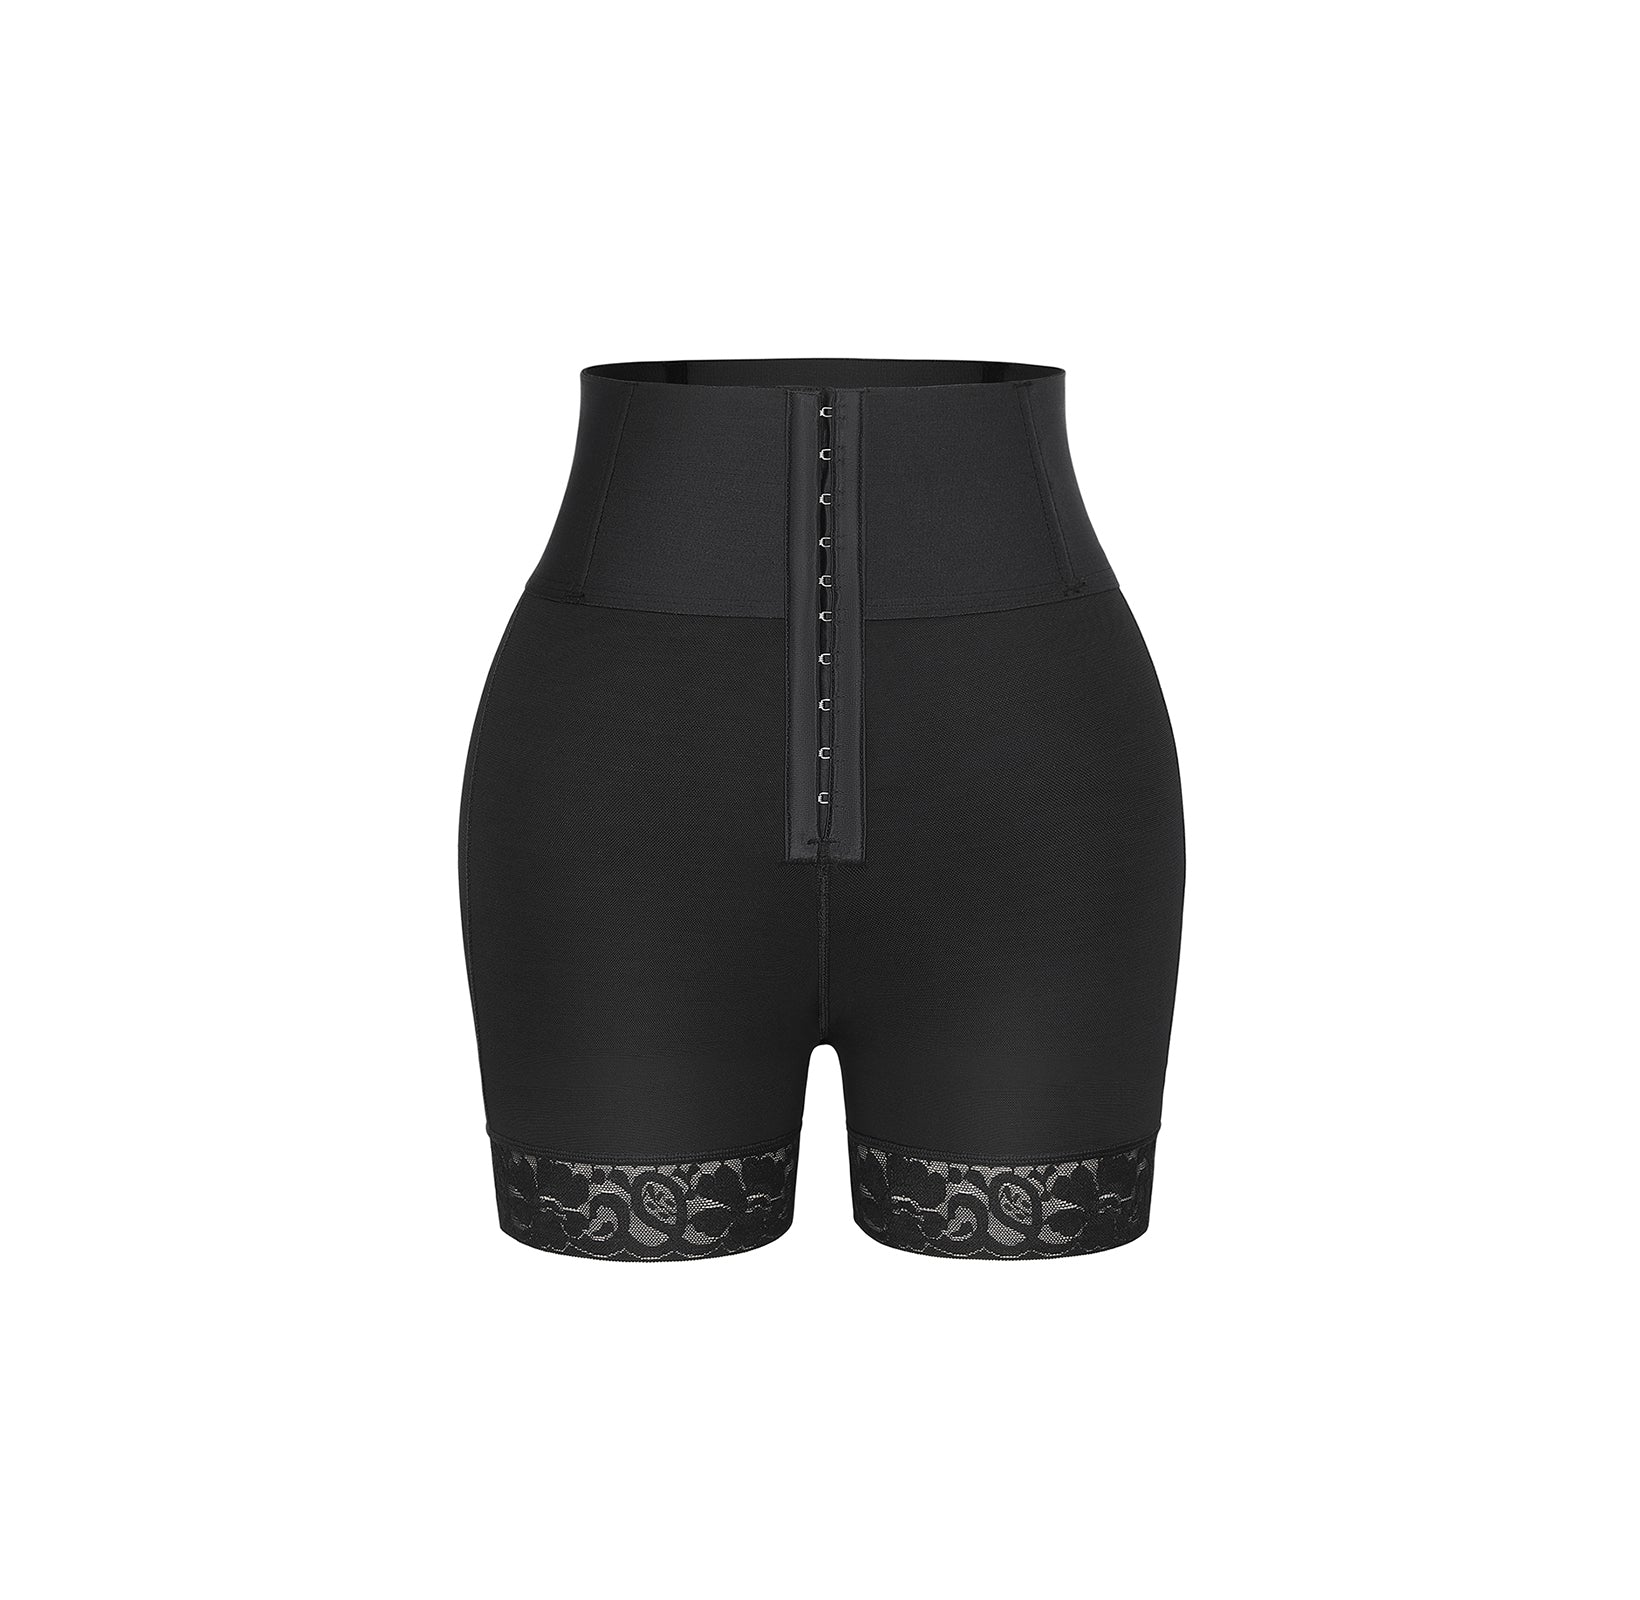 High Waist Shorts Slimming Underwear Breasted Lace Butt Lifter